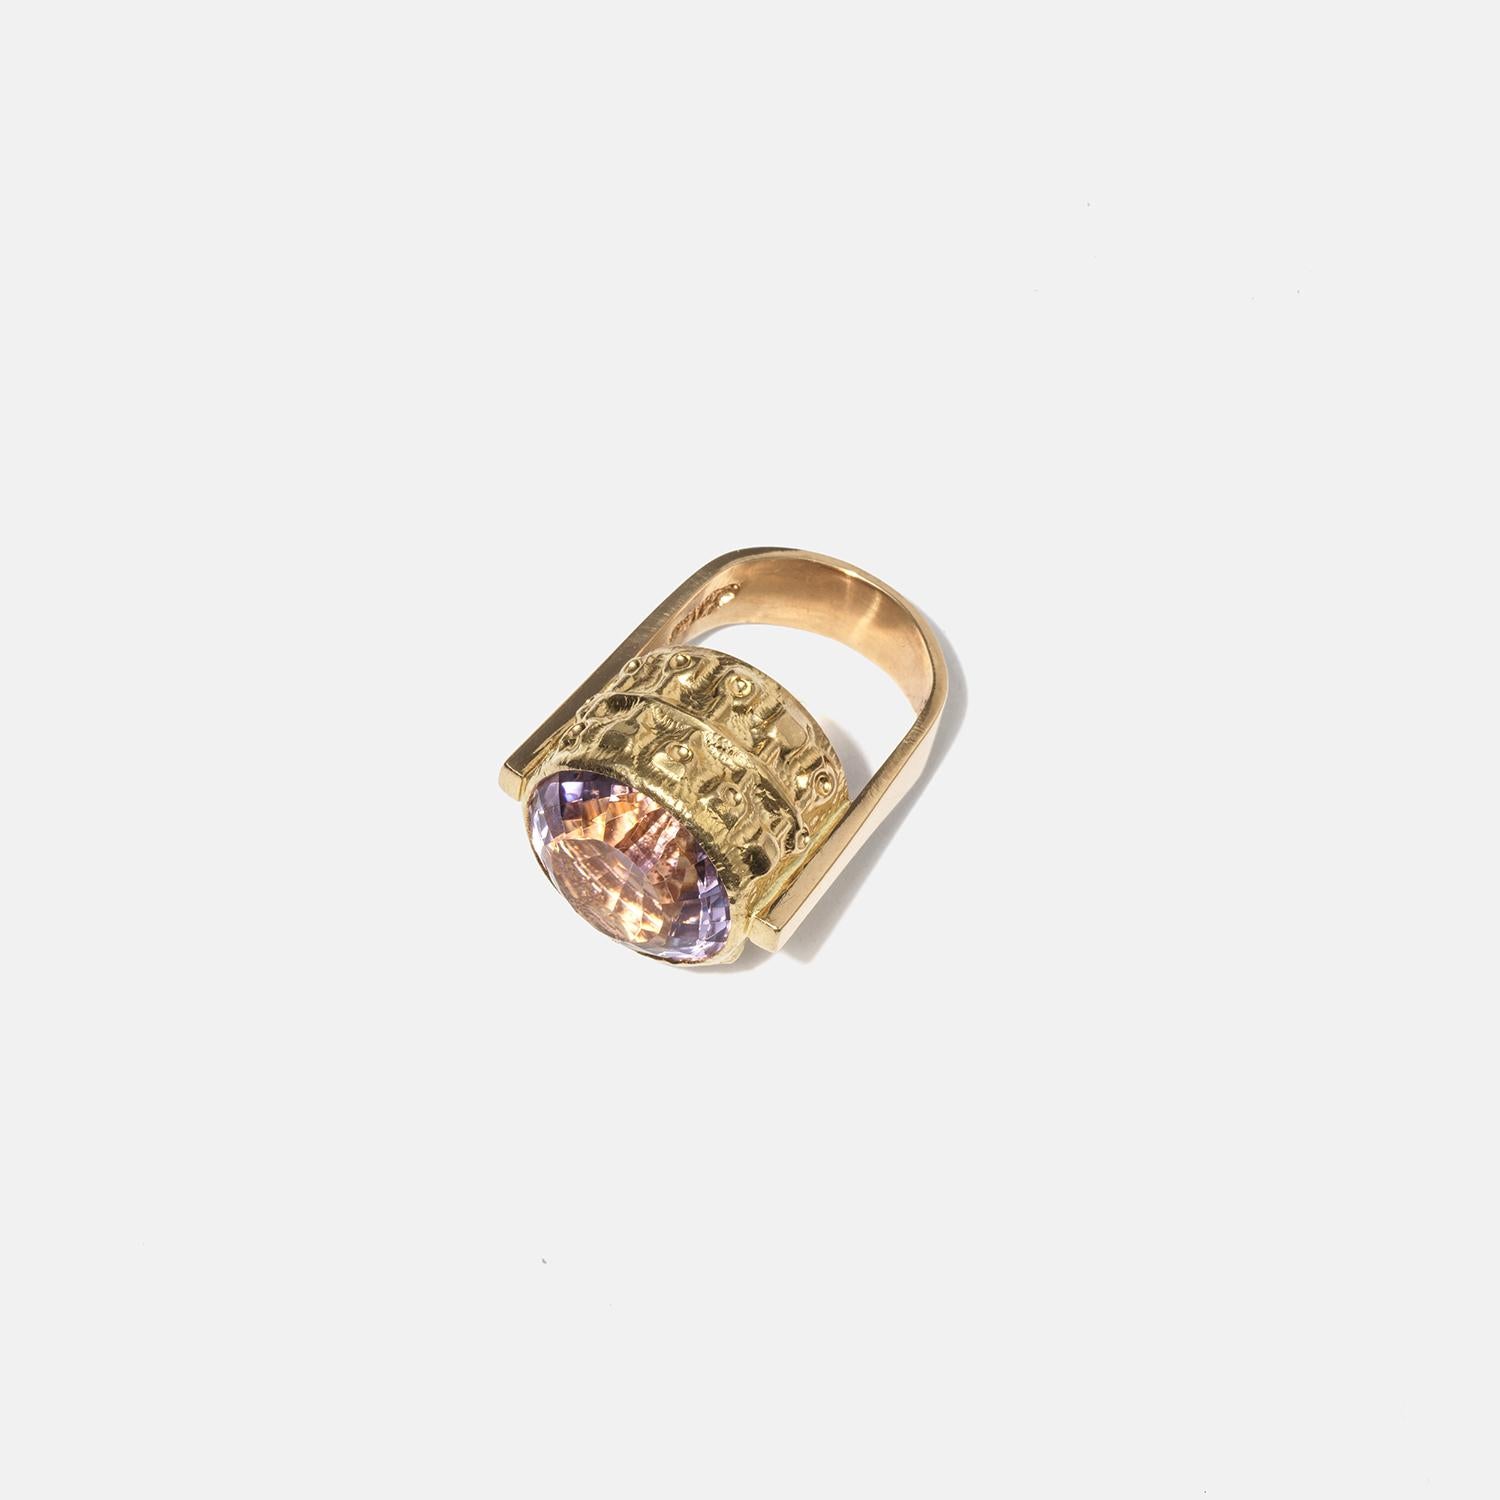 Vintage 18k Gold and Amethyst Ring by Swedish master Eric Robbert 1969 For Sale 2